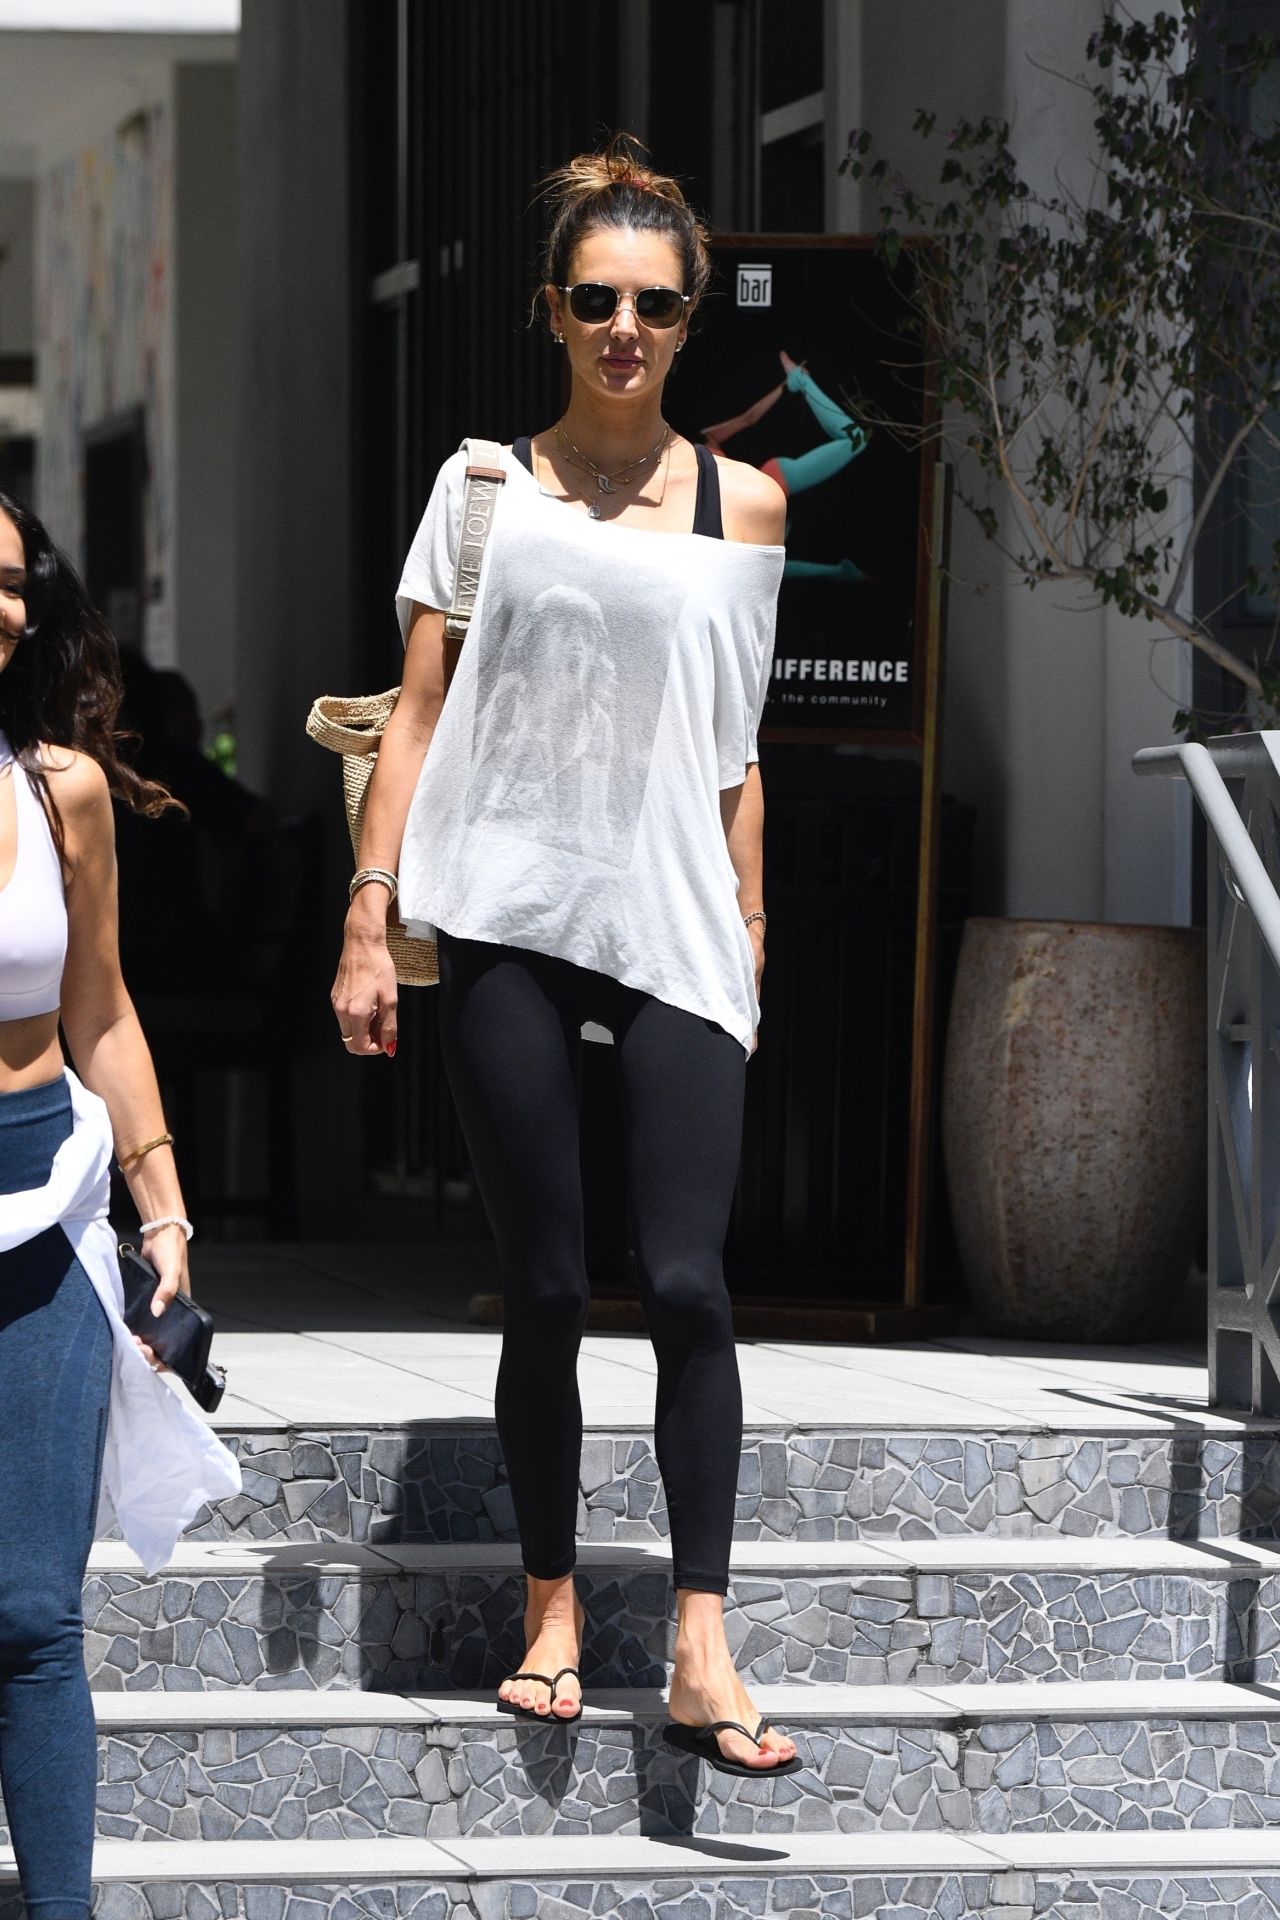 Alessandra Ambrosio Brentwood April 15, 2021 – Star Style